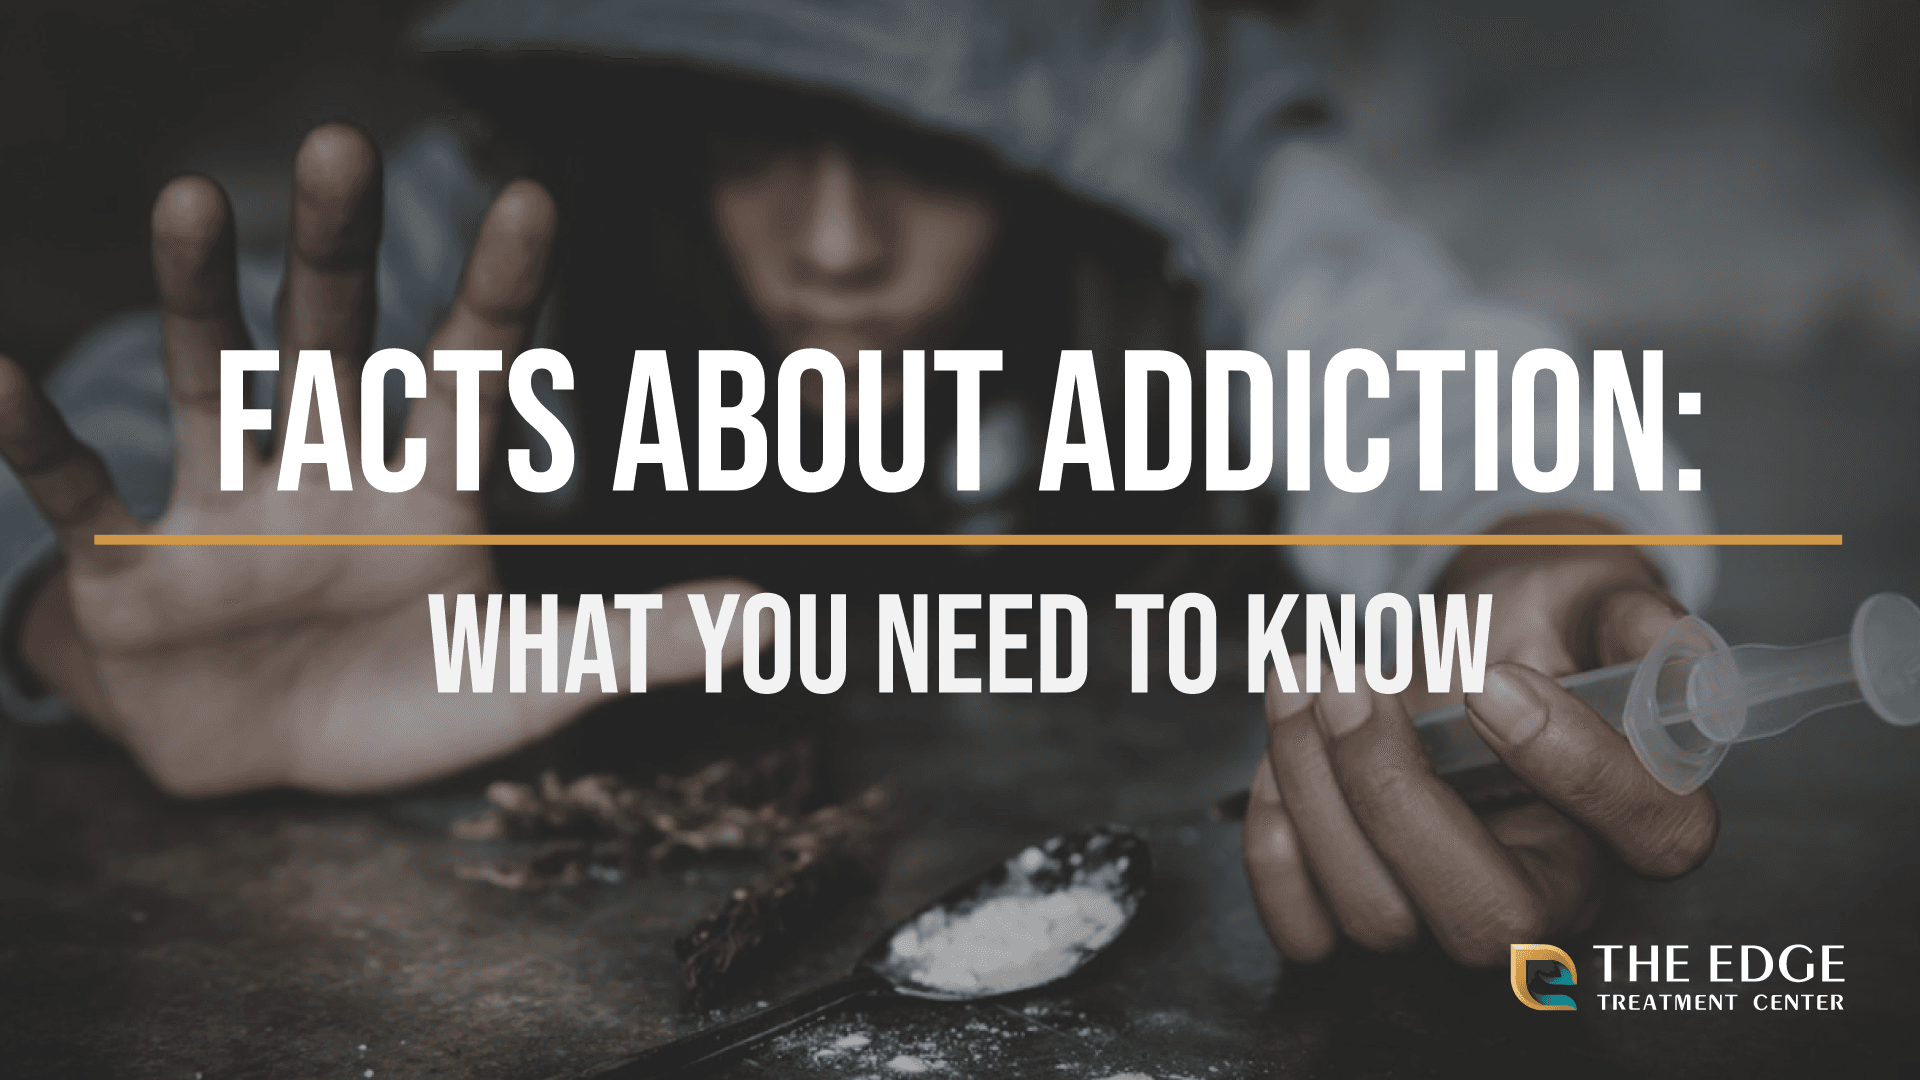 Get the Facts About Addiction